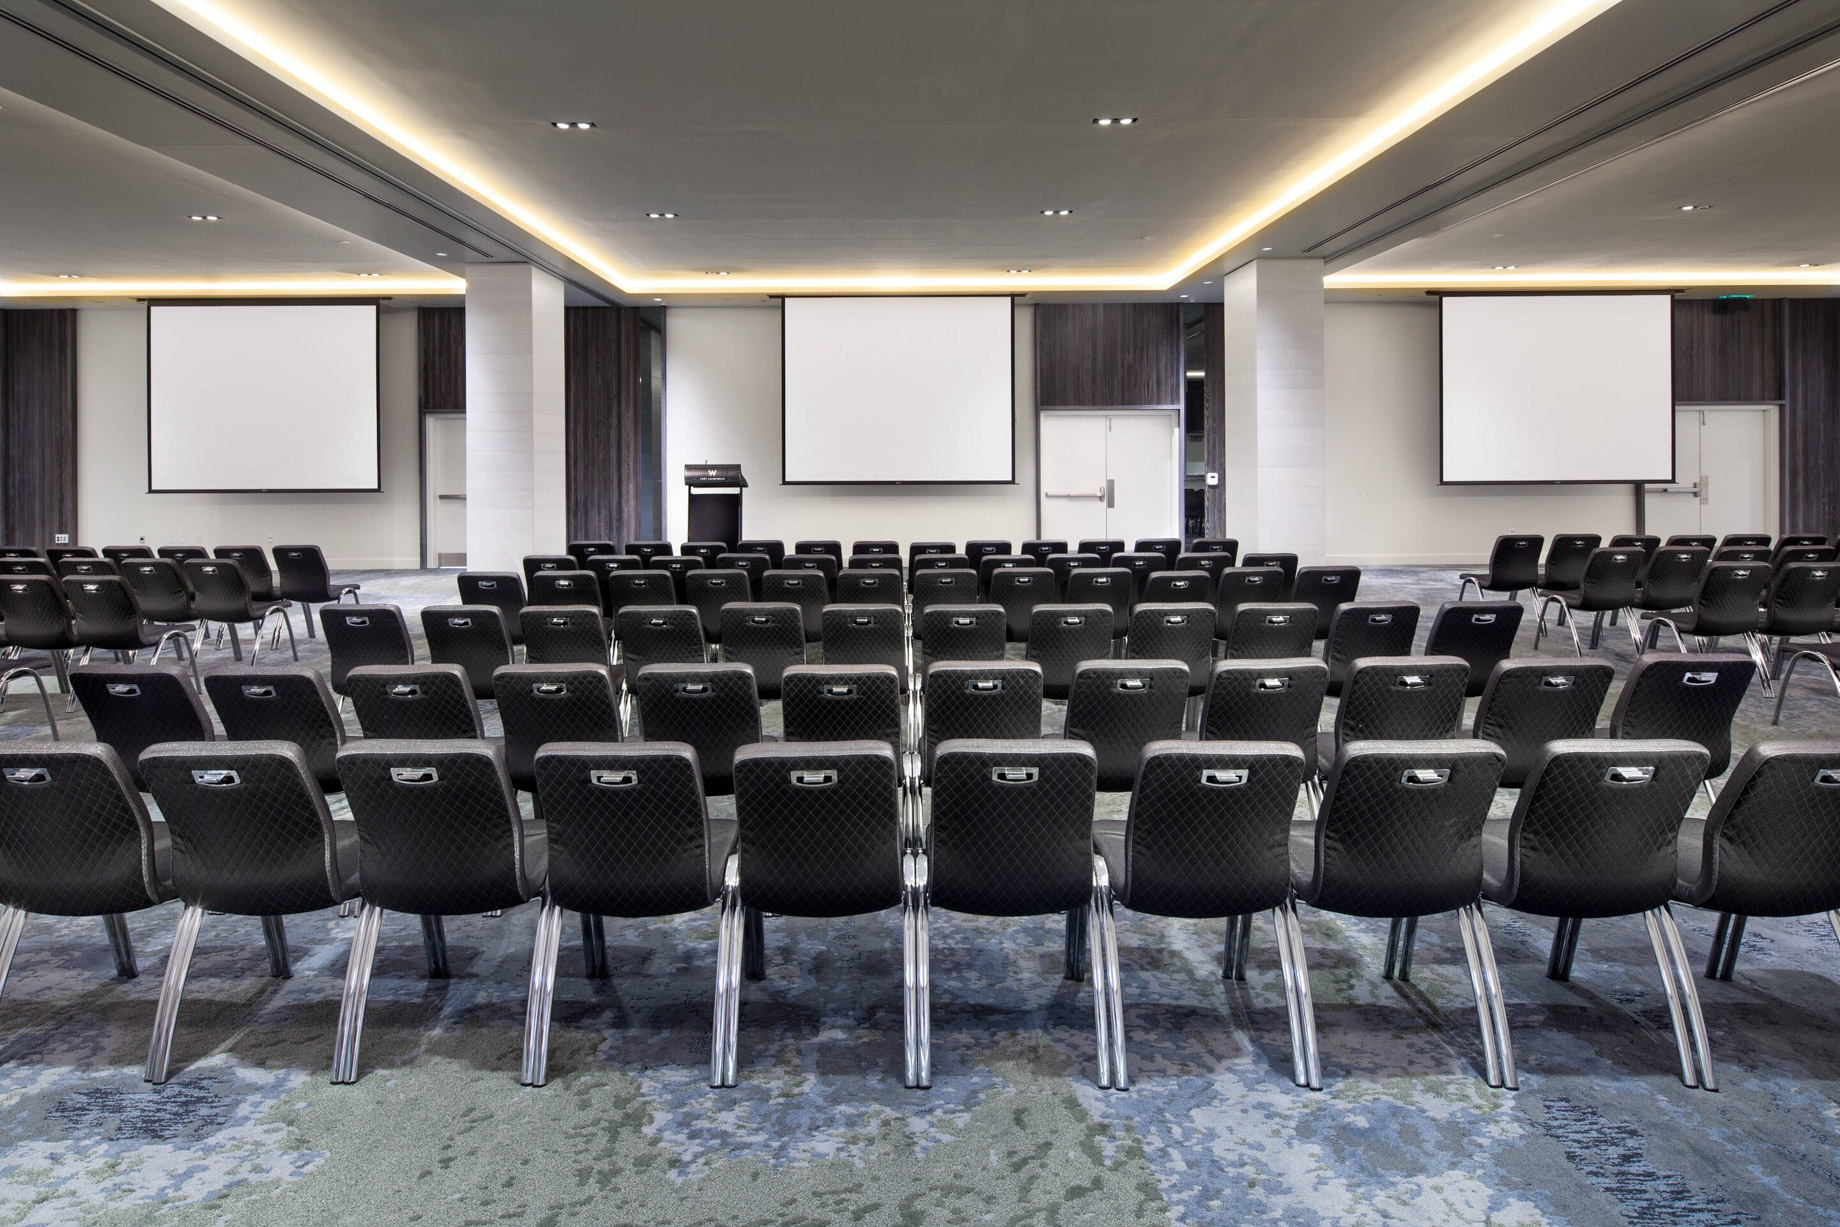 W Fort Lauderdale Hotel – Fort Lauderdale, FL, USA – Mingle Meeting Room Theater Setup